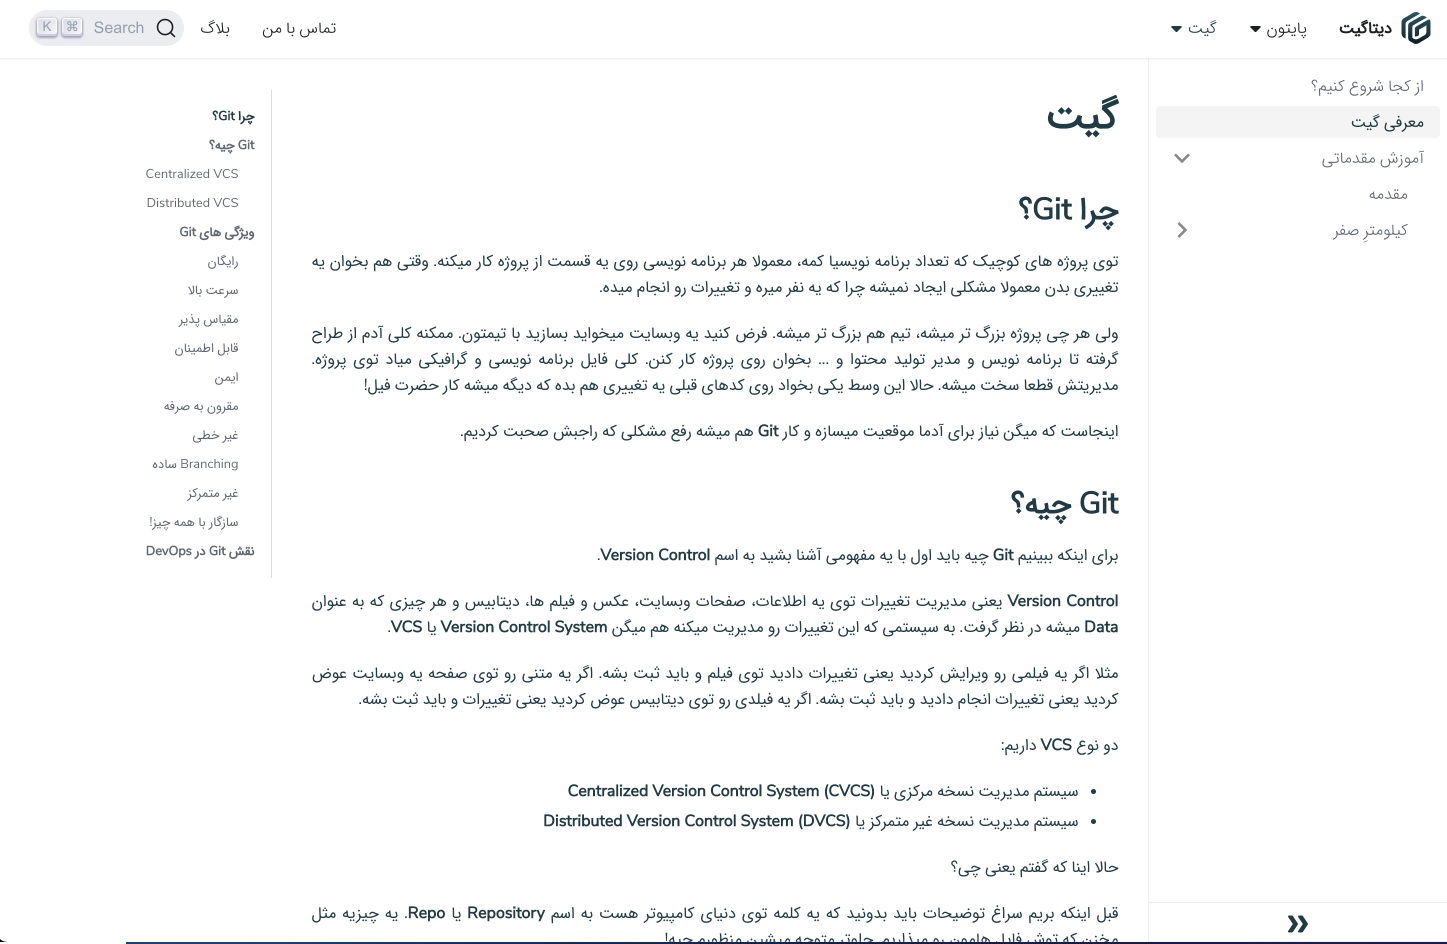 Datagit&#39;s website in Persian, a right-to-left language. The sidebar appears on the right of the window and the TOC appears on the left.